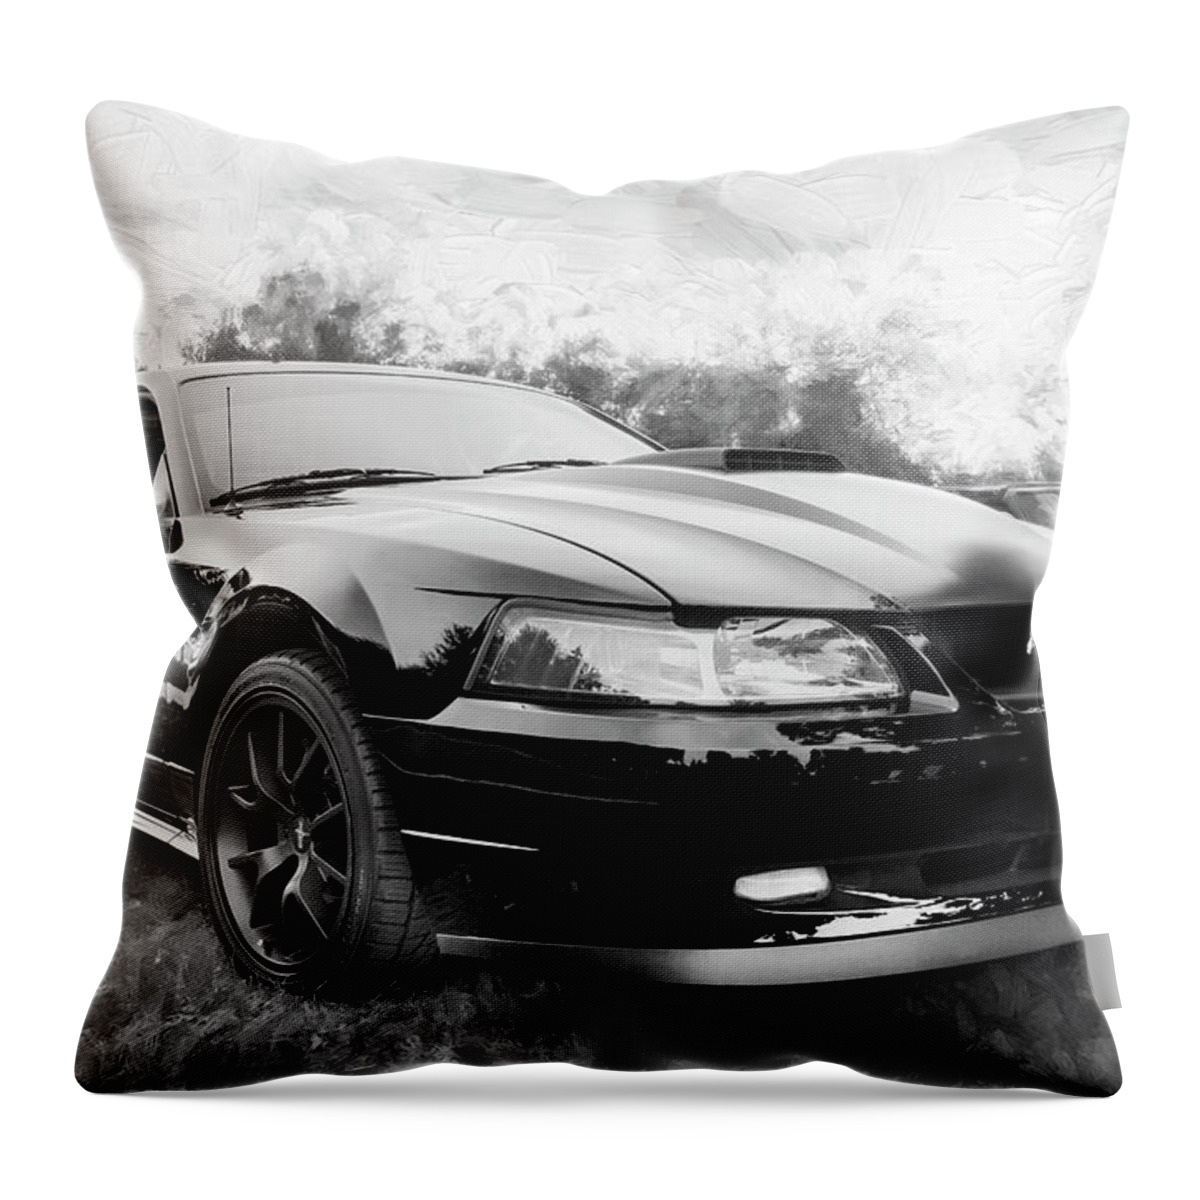 2003 Mustang Throw Pillow featuring the photograph 2003 Ford Mustang Mach 1 BW by Rich Franco